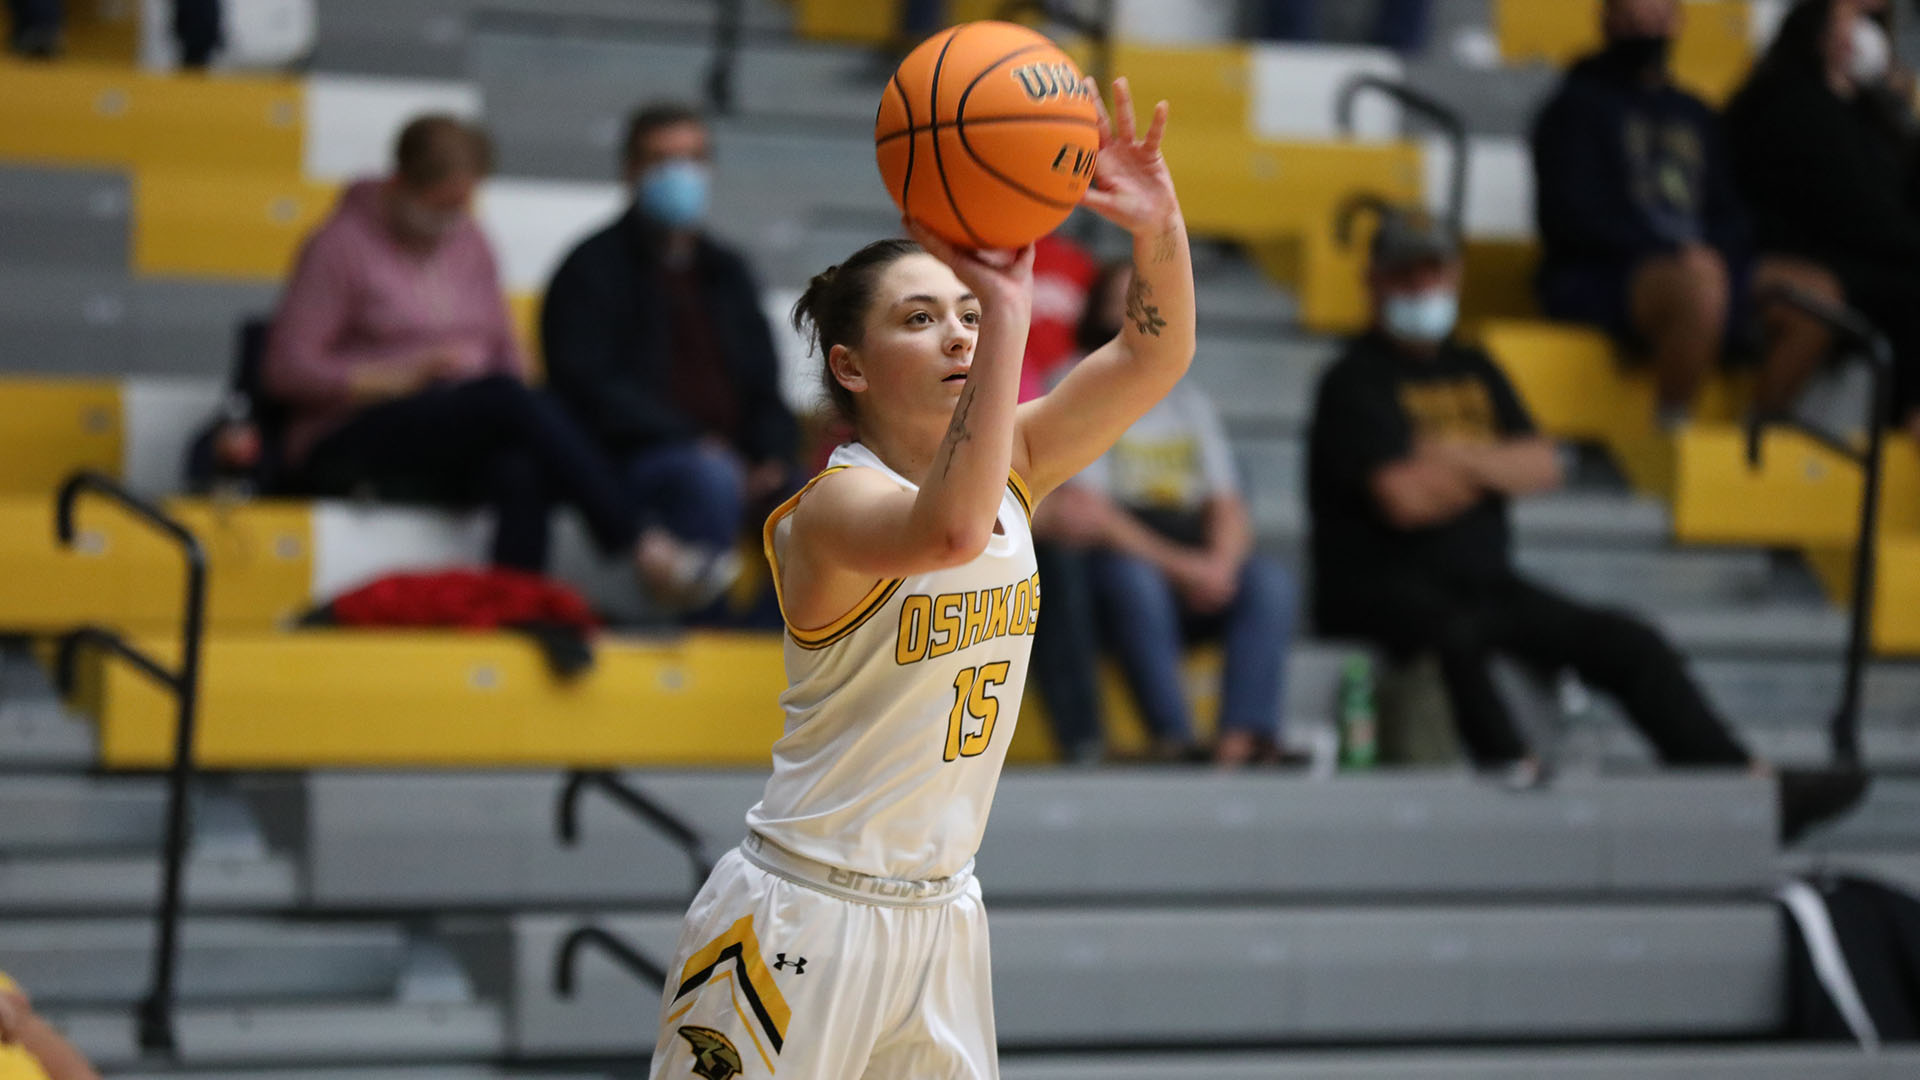 Kennedy Osterman had 10 points, four rebounds and three assists against the Cougars.